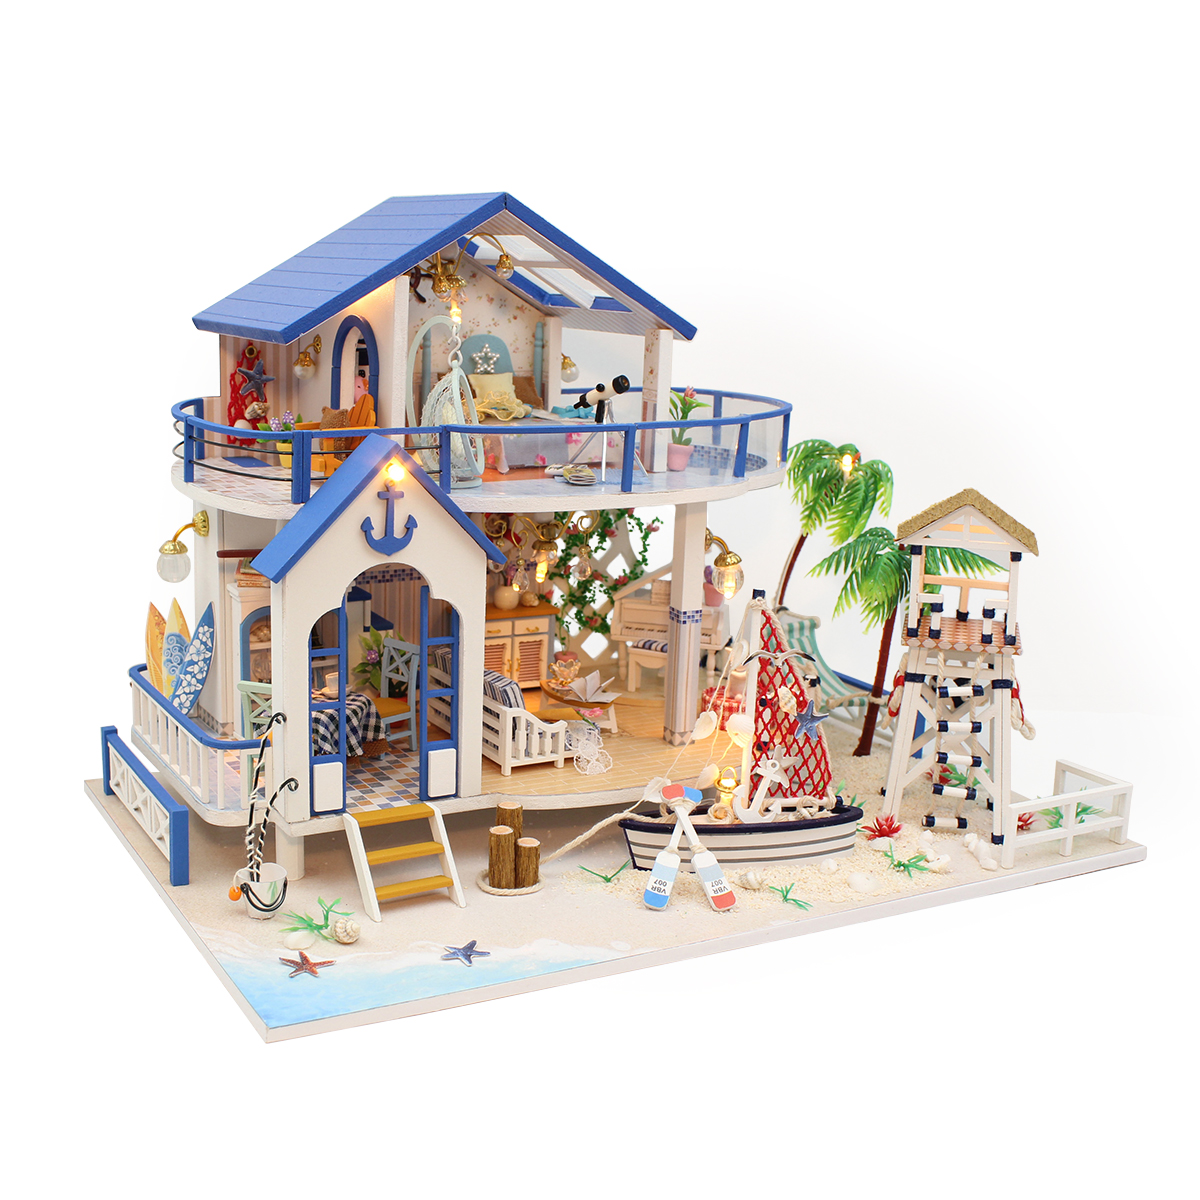 Hoomeda-Legend-Of-The-Blue-Sea-DIY-Handmade-Assemble-Doll-House-Miniature-Model-with-Lights-Music-fo-1844617-5